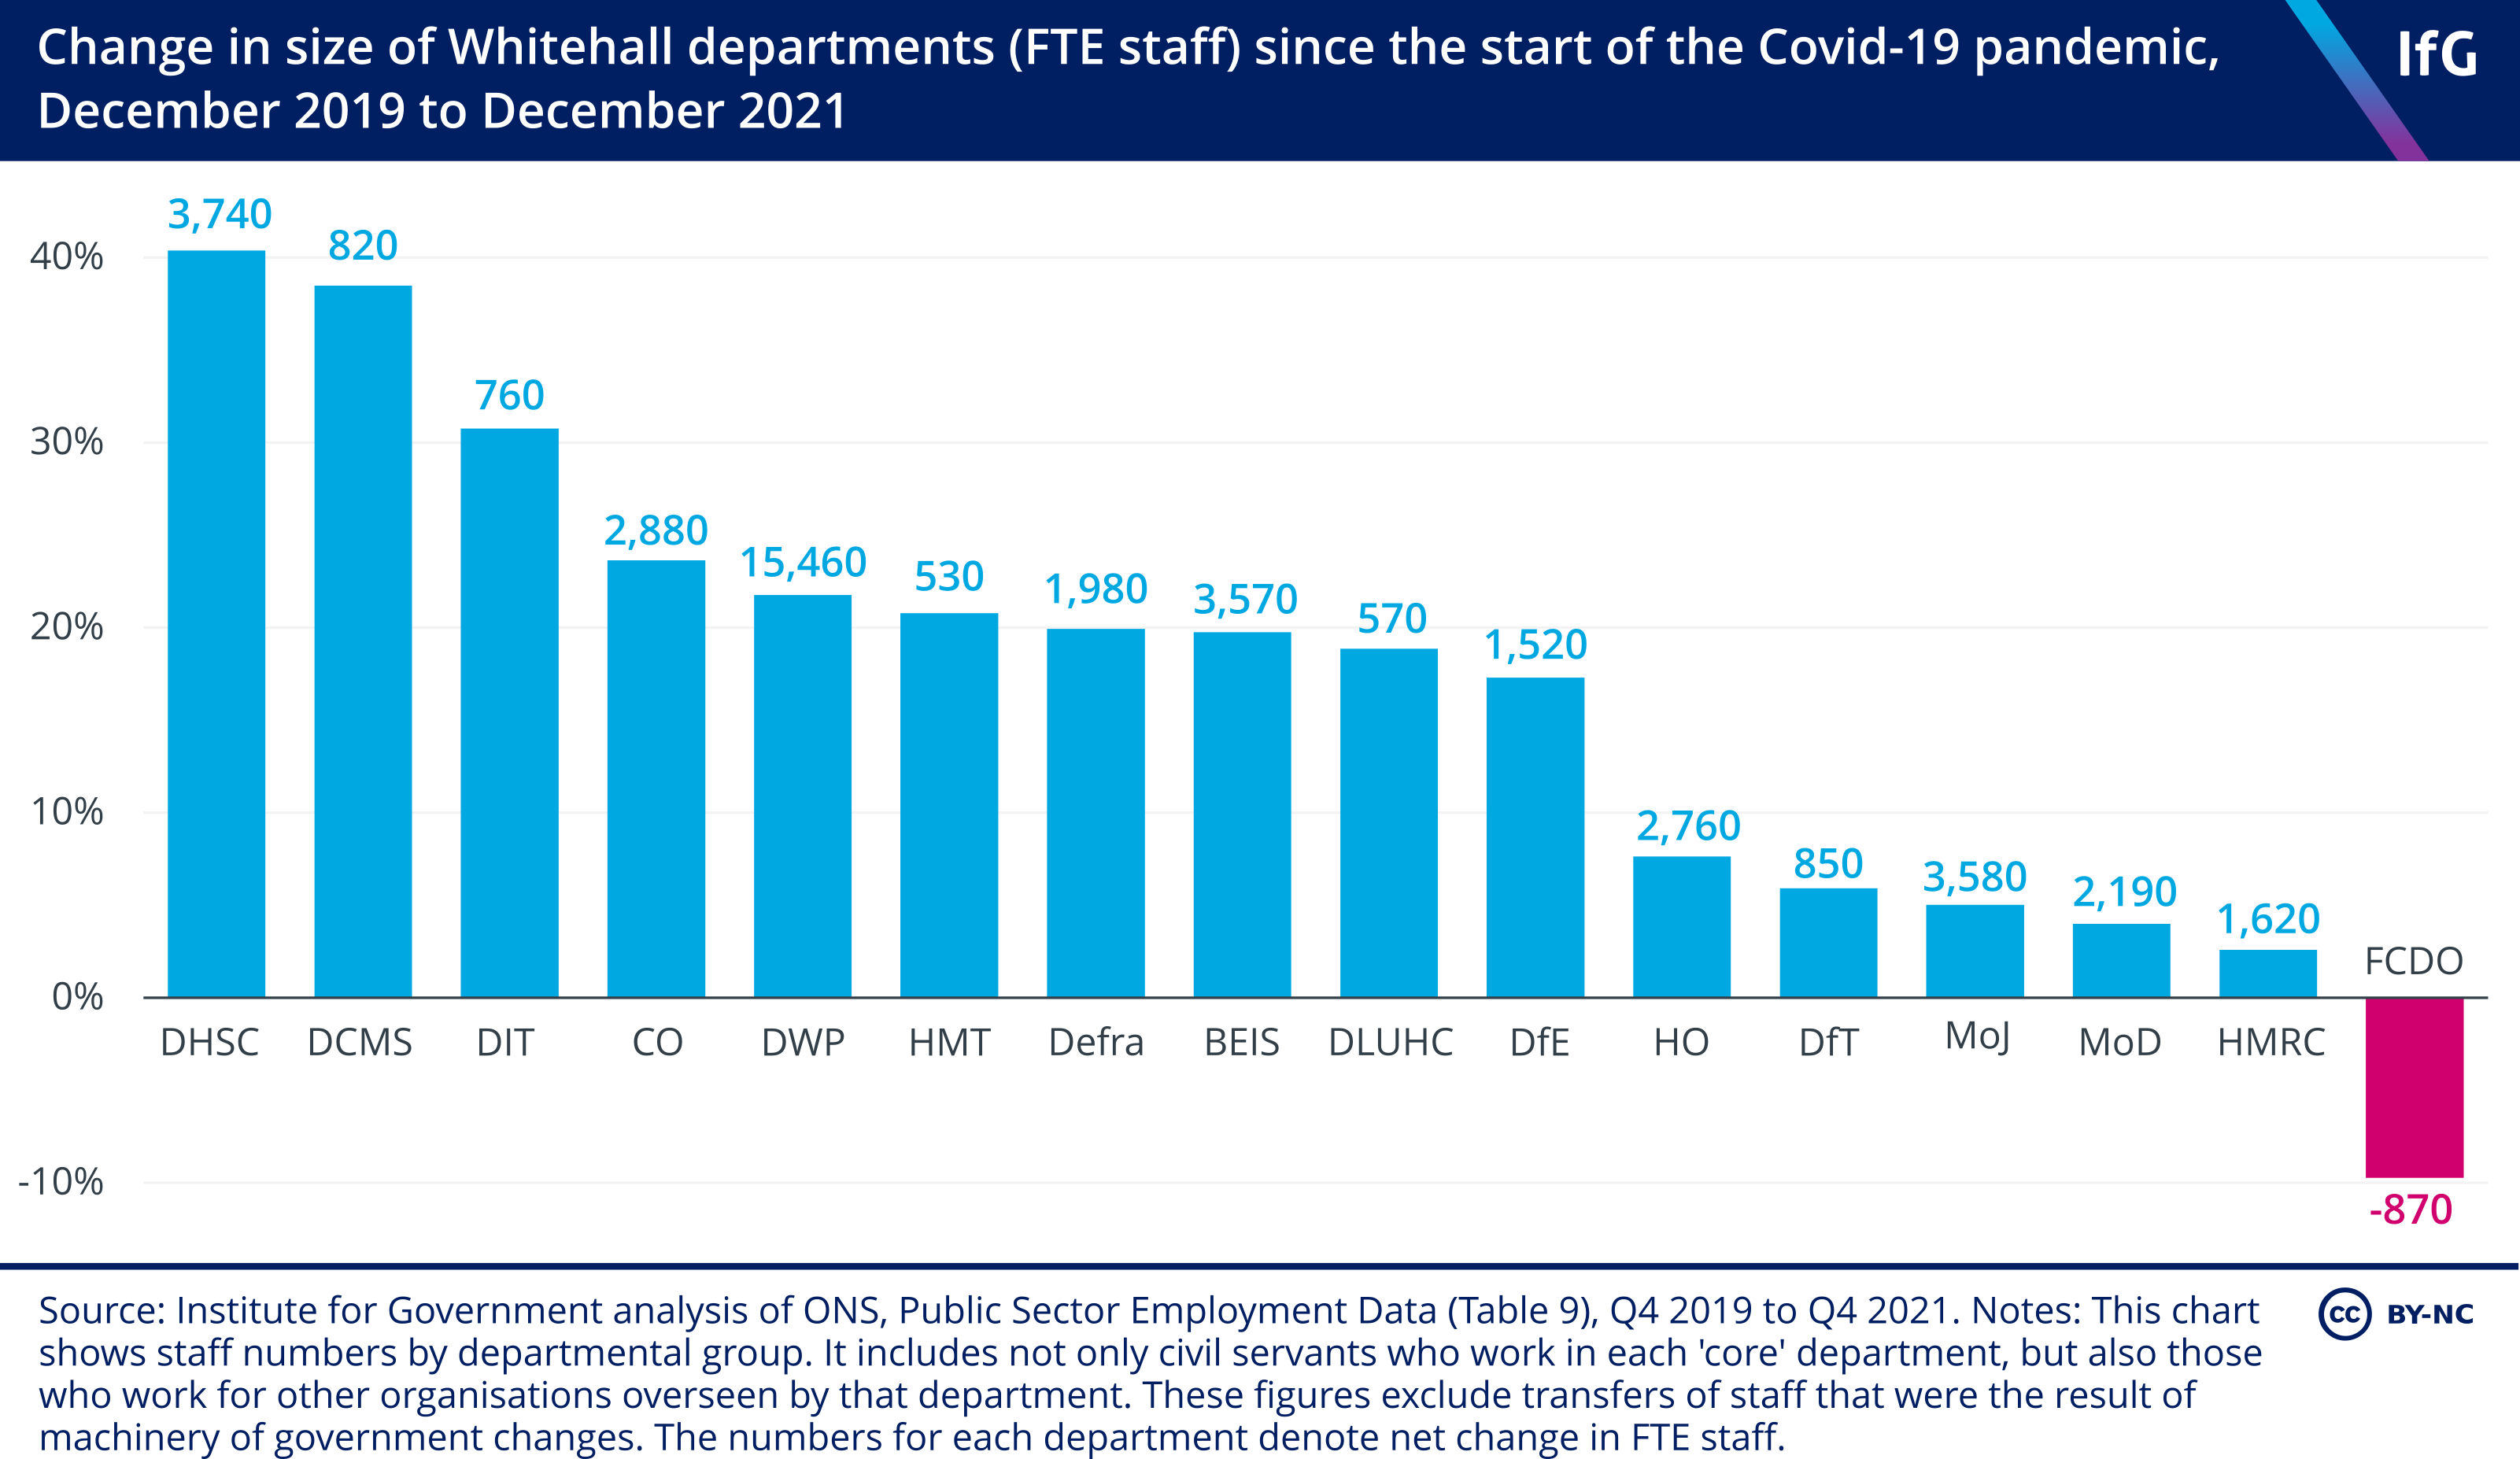 Change in size of Whitehall departments (FTE staff) since the start of the Covid-19 pandemic,  December 2019 to December 2021